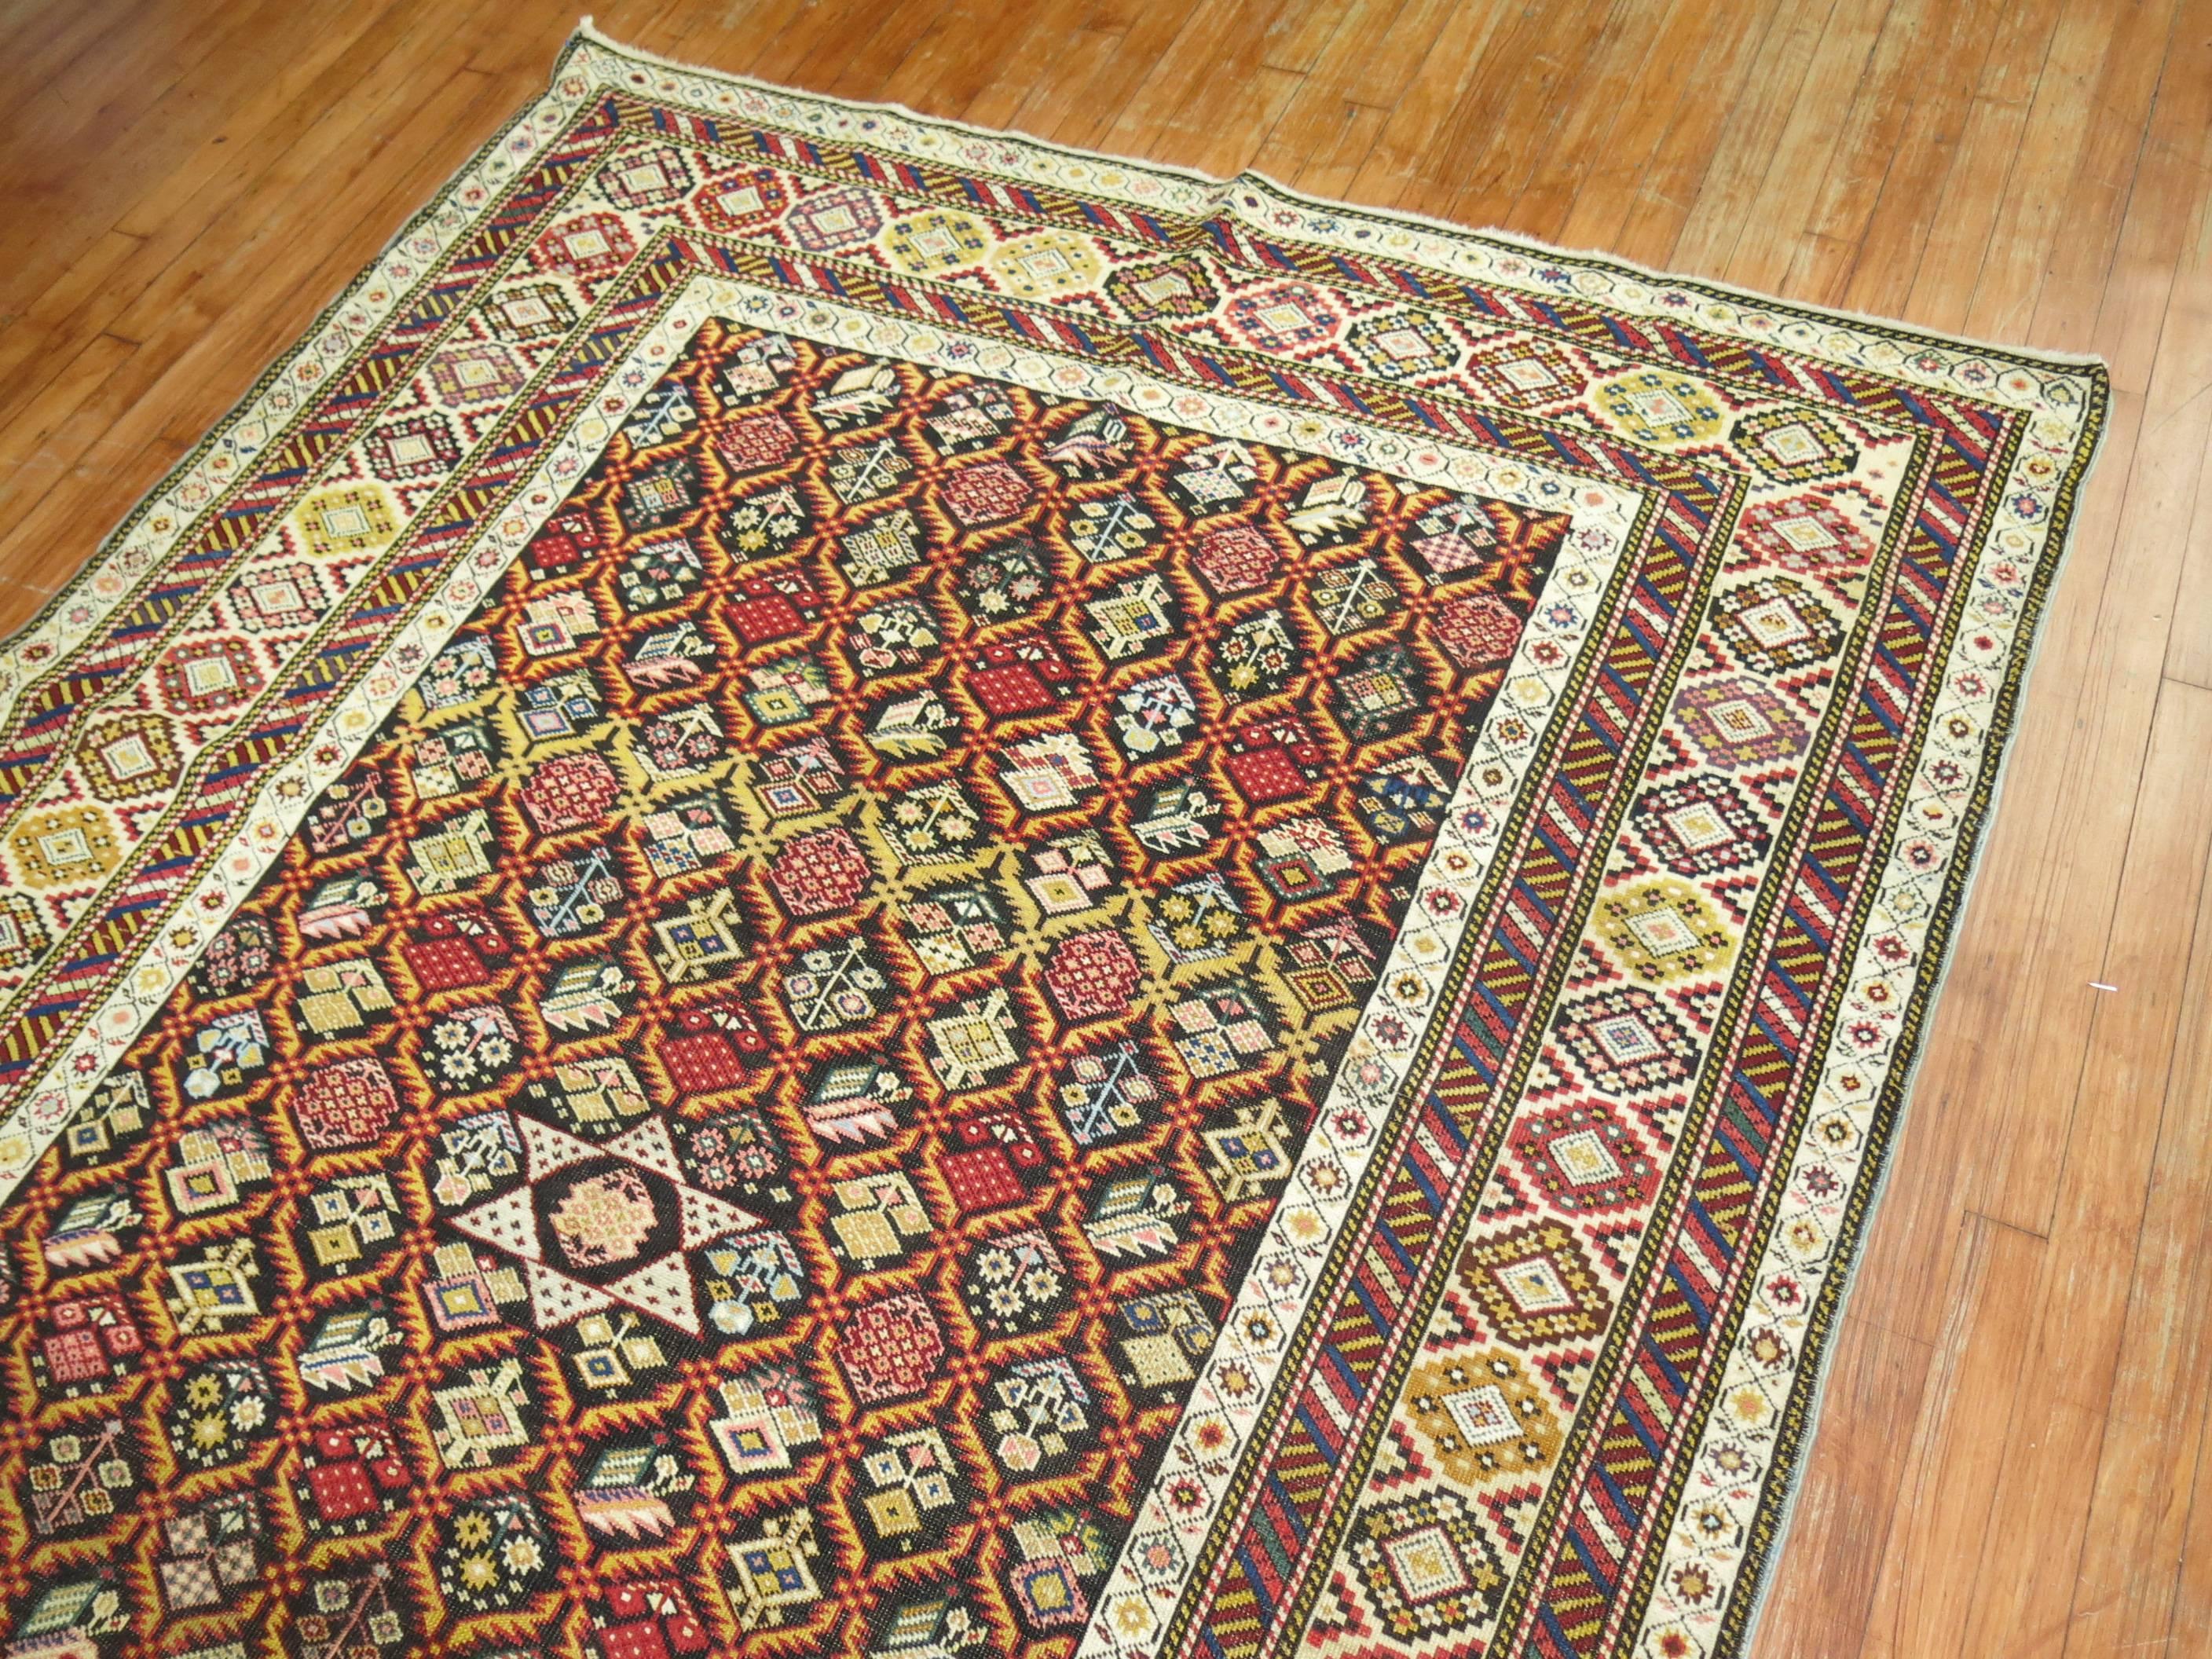 Wool Rare Early 20th Century Hand-Woven Antique Caucasian Shirvan Rug